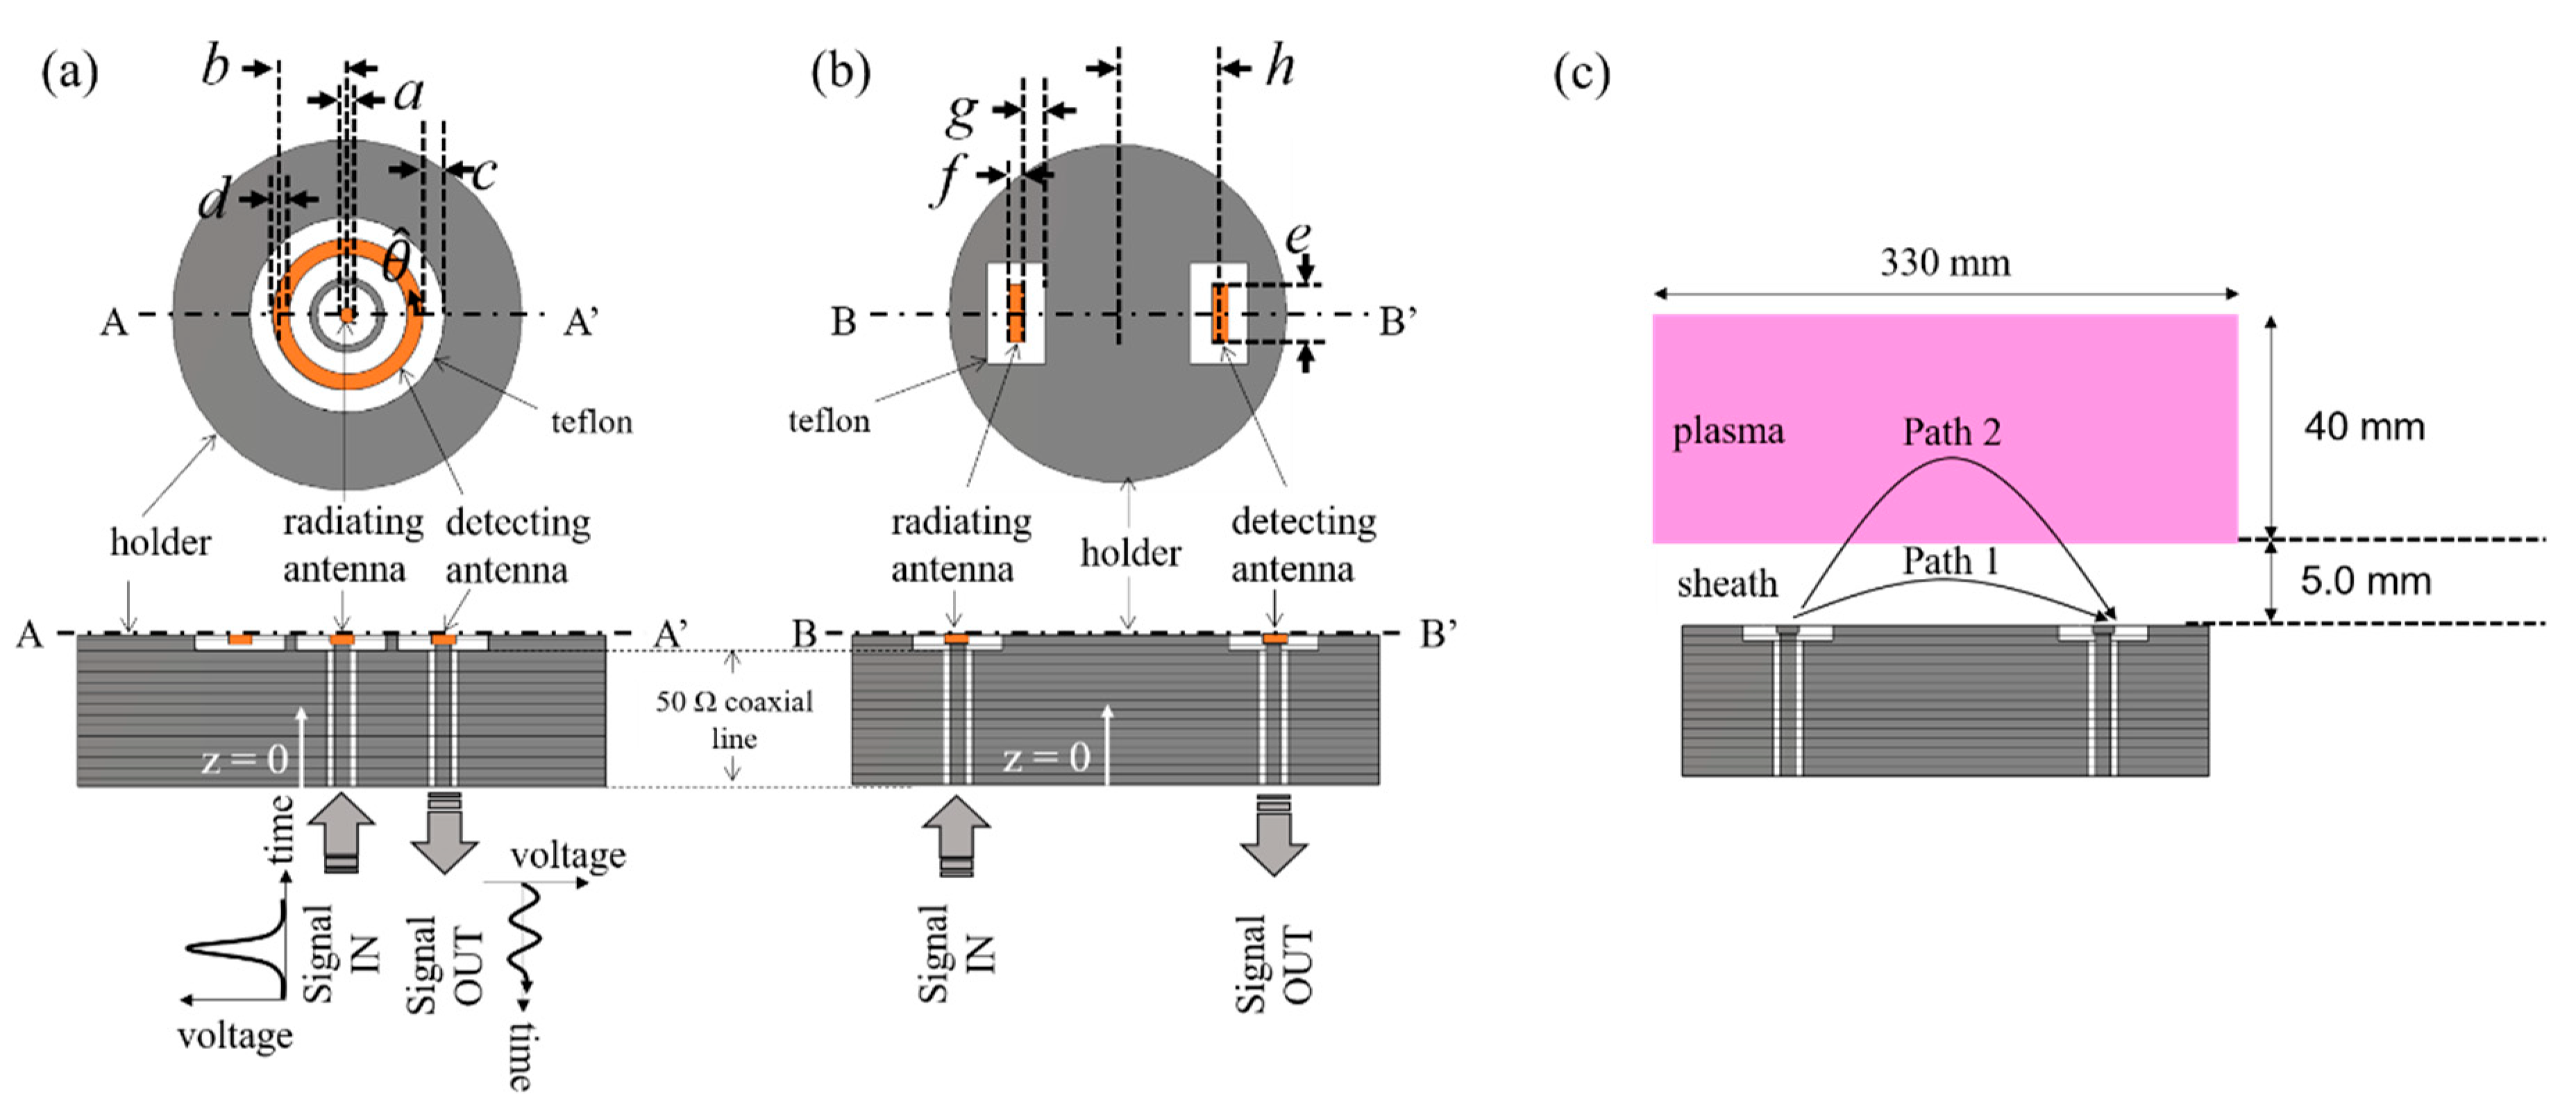 Applied Sciences | Free Full-Text | Computational Characterization of  Microwave Planar Cutoff Probes for Non-Invasive Electron Density  Measurement in Low-Temperature Plasma: Ring- and Bar-Type Cutoff Probes